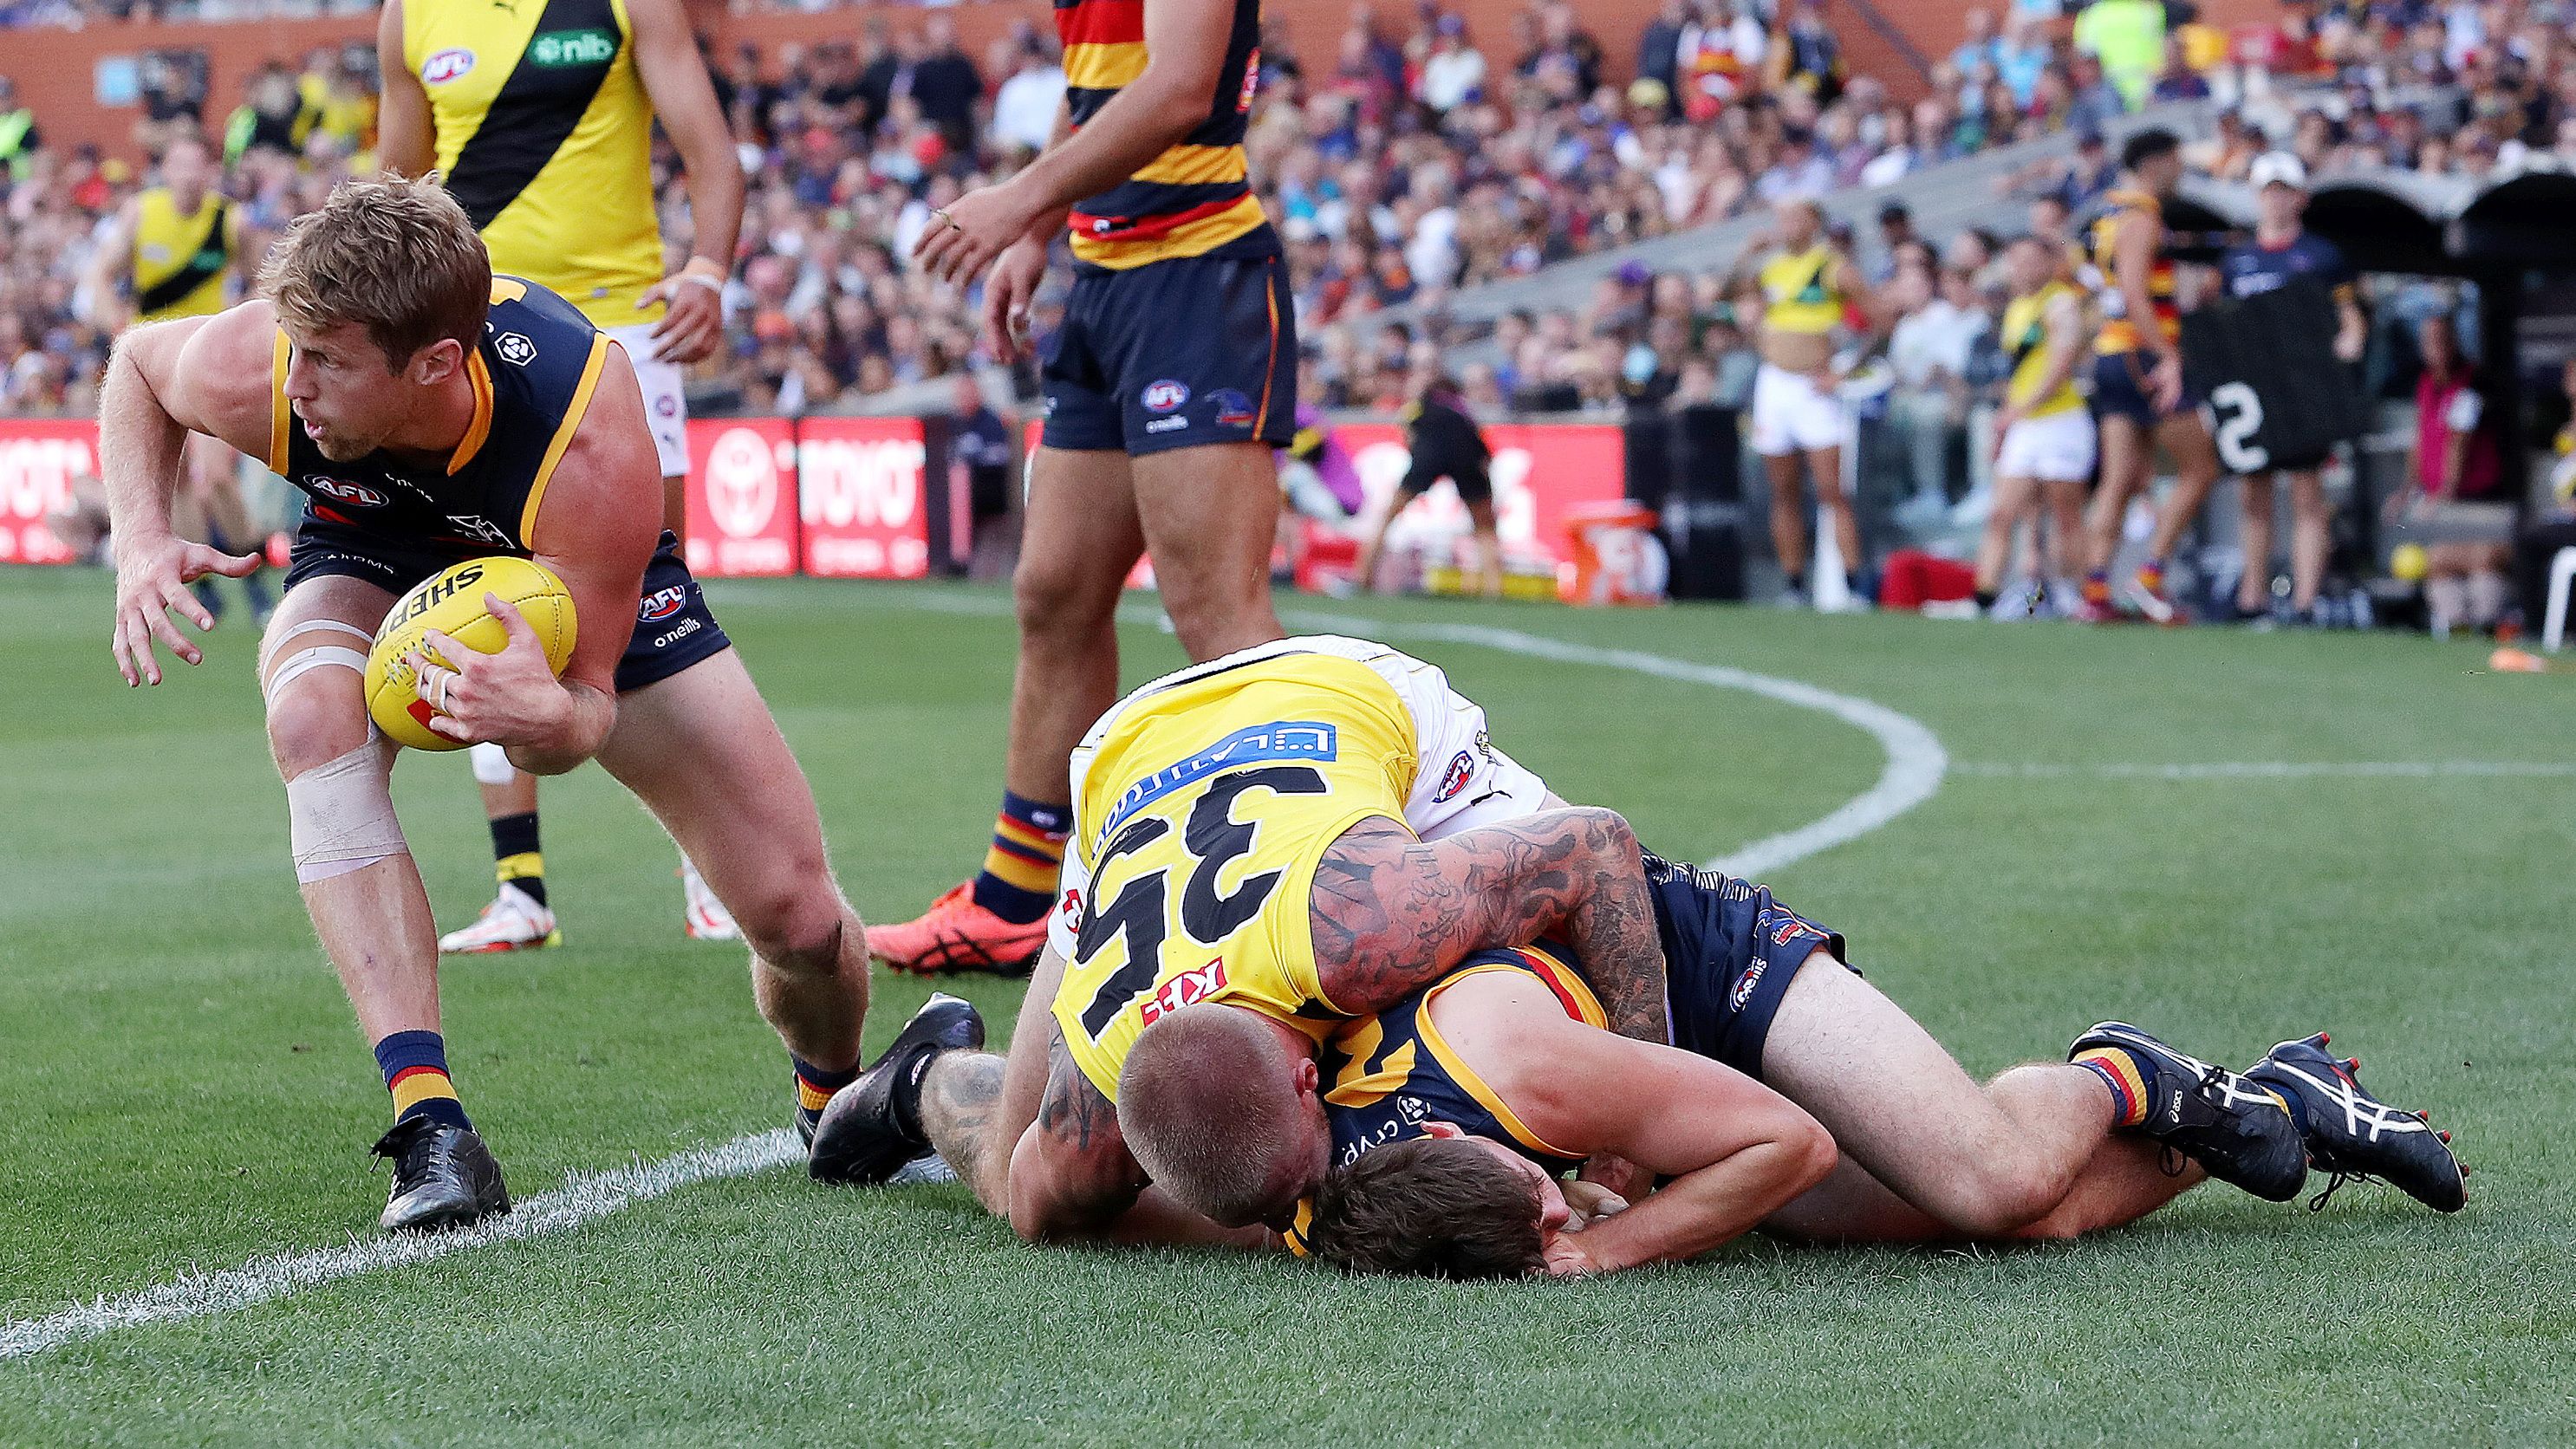 ADELAIDE, AUSTRALIA - MARCH 25: Patrick Parnell of the Crows is tackled by Nathan Broad of the Tigers during the 2023 AFL Round 02 match between the Adelaide Crows and the Richmond Tigers at Adelaide Oval on March 25, 2023 in Adelaide, Australia. (Photo by Sarah Reed/AFL Photos)